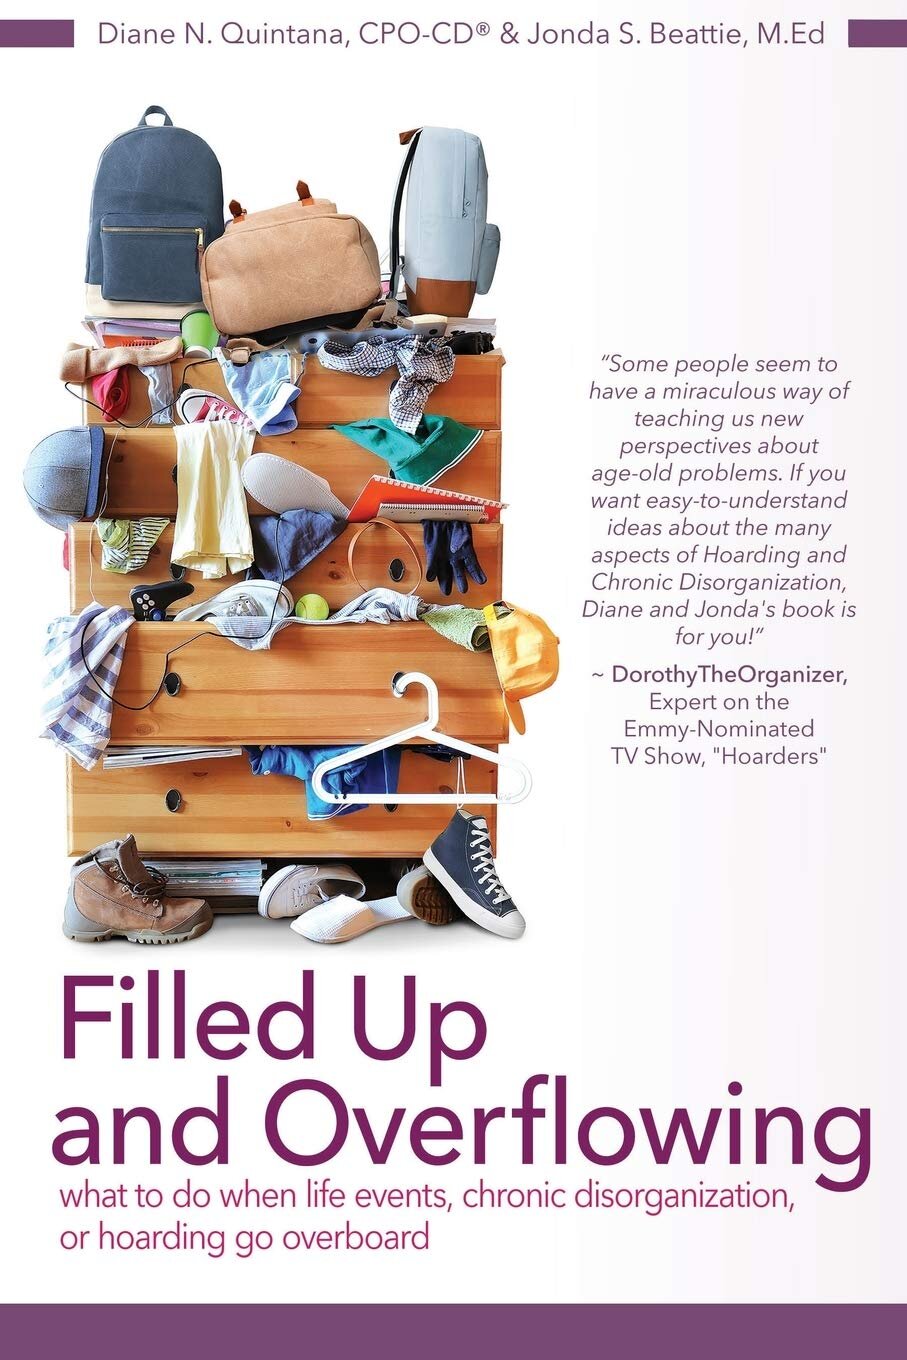 Filled Up and Overflowing by Diane Quintana and Jonda Beattie